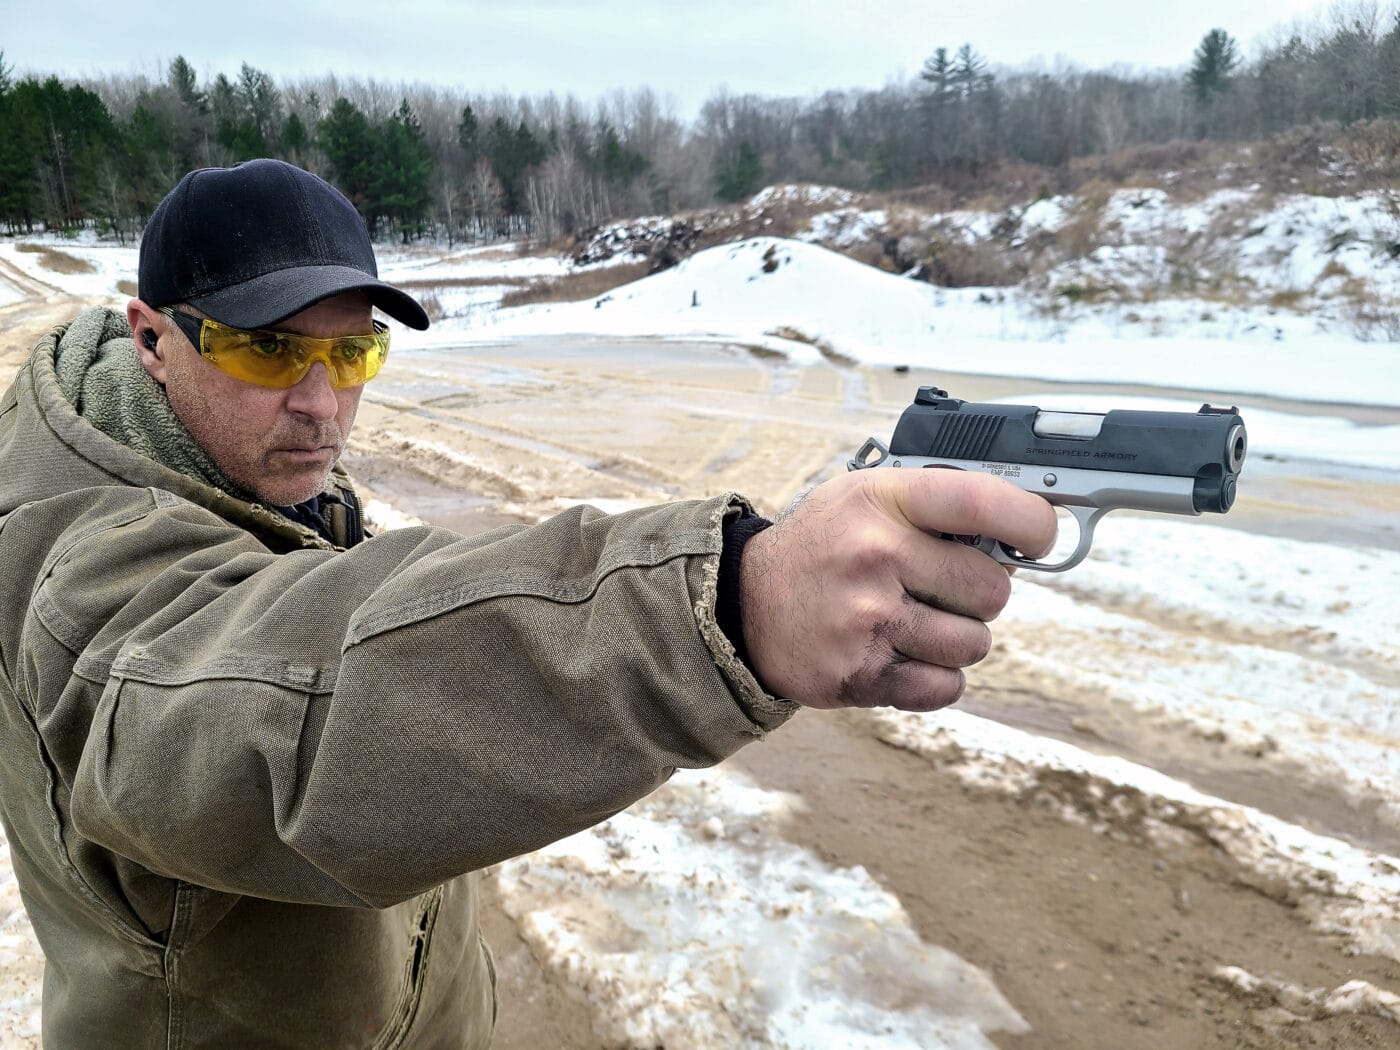 Man at range during one handed shooting training